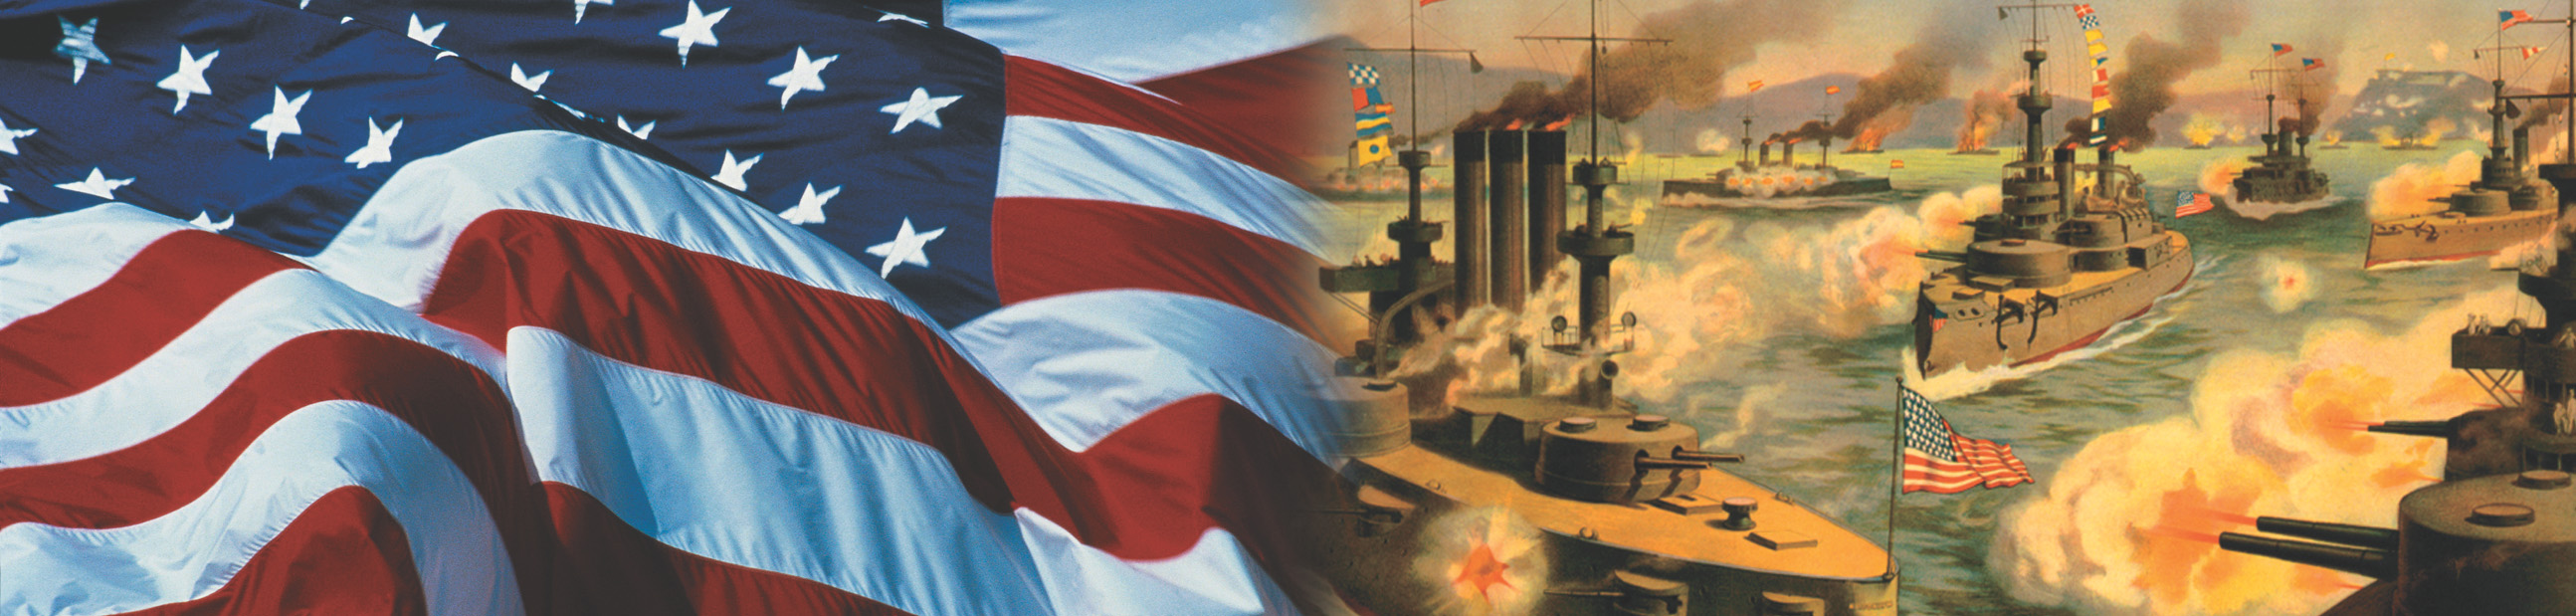 Banner: American flag and ships exchanging cannon-fire